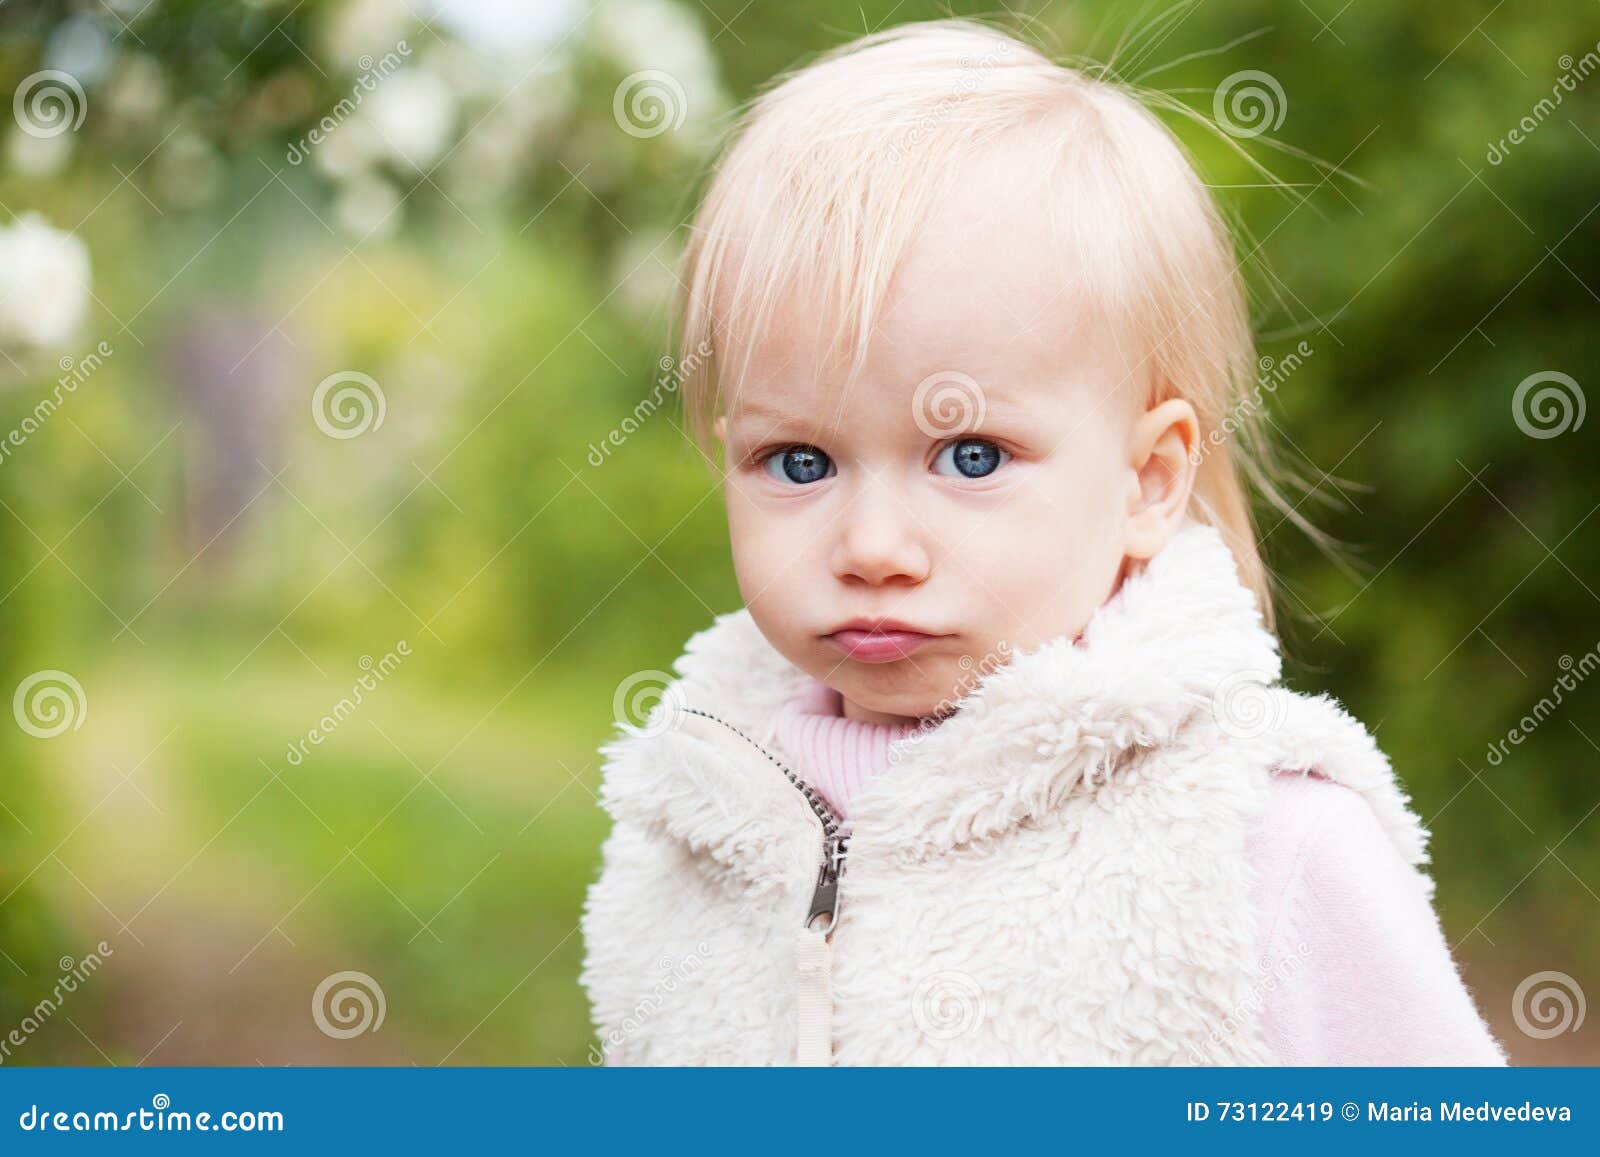 Cute Baby Girl with Blonde Hair in the Blooming Garden Stock Image - Image  of cute, blonde: 73122419